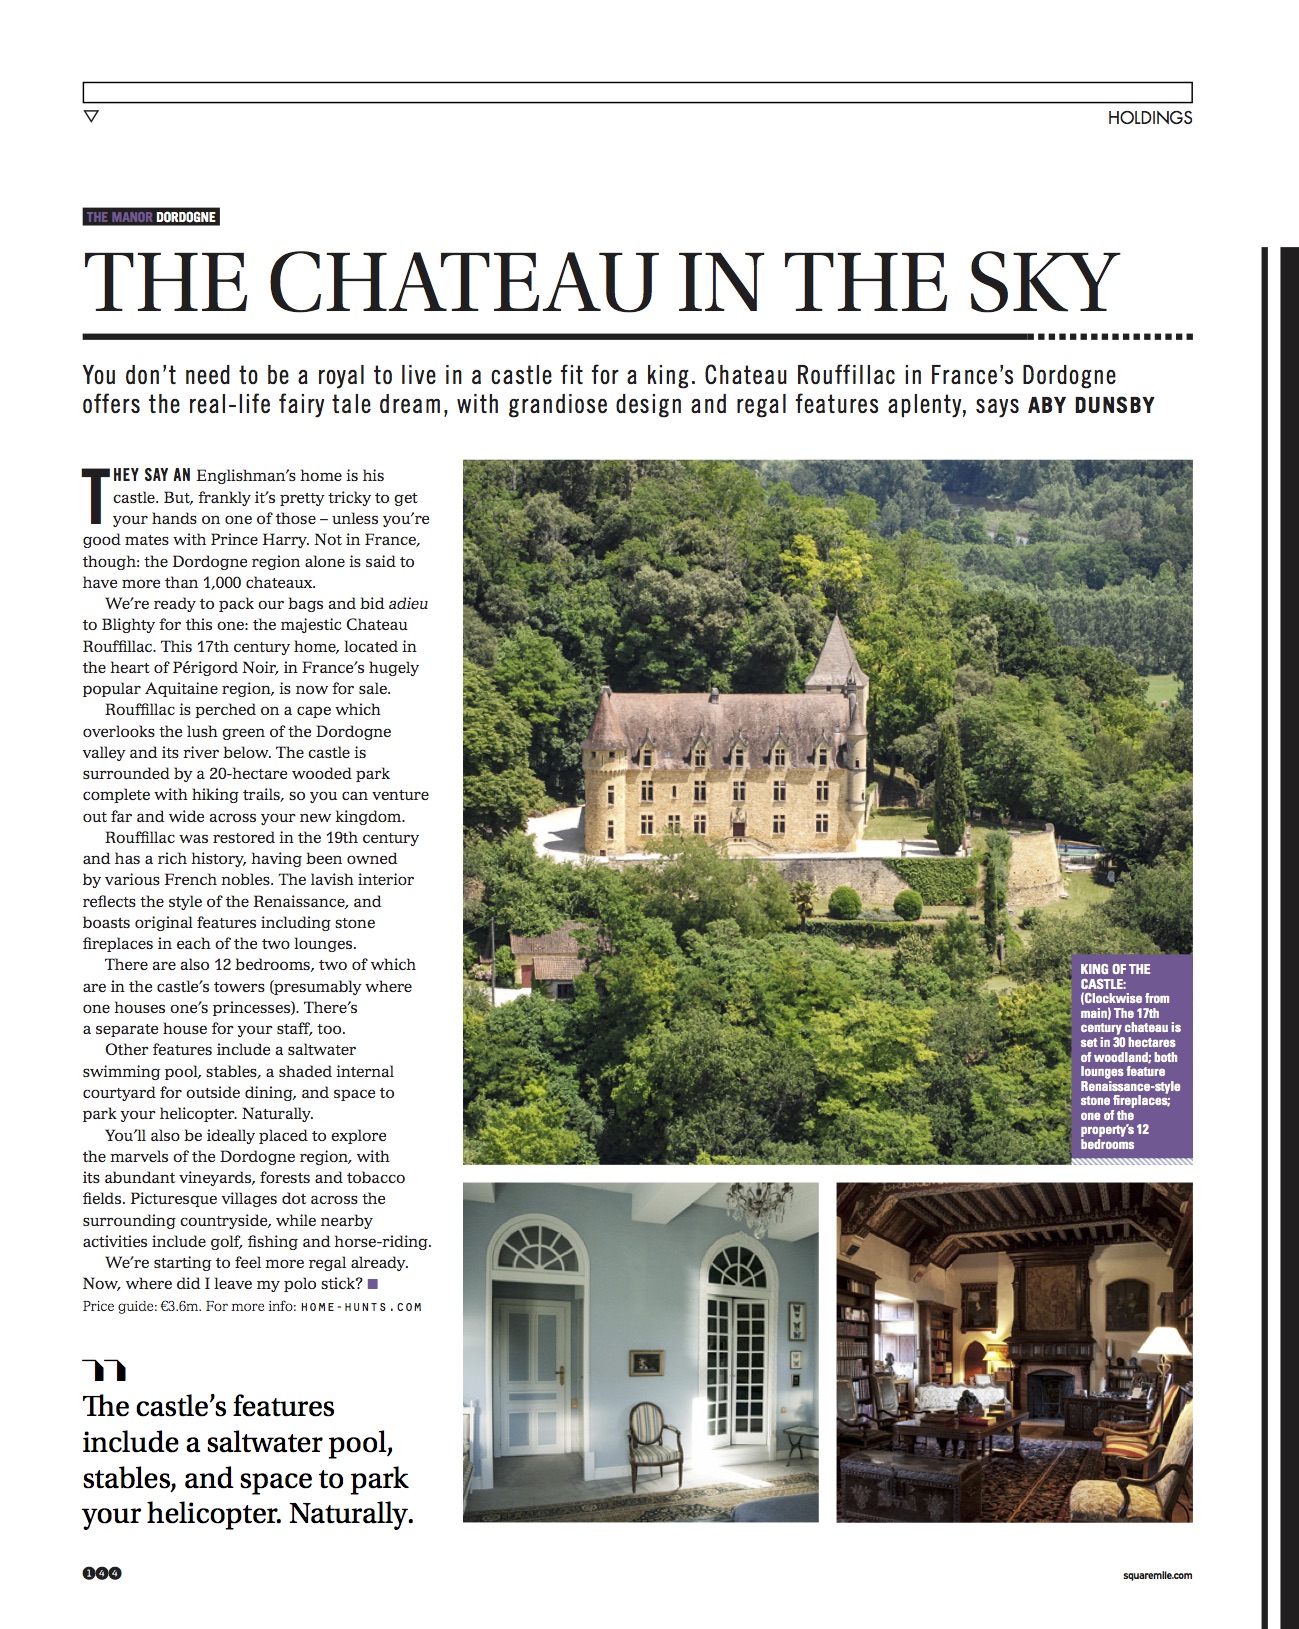 Square Mile Magazine – The Chateau in the Sky